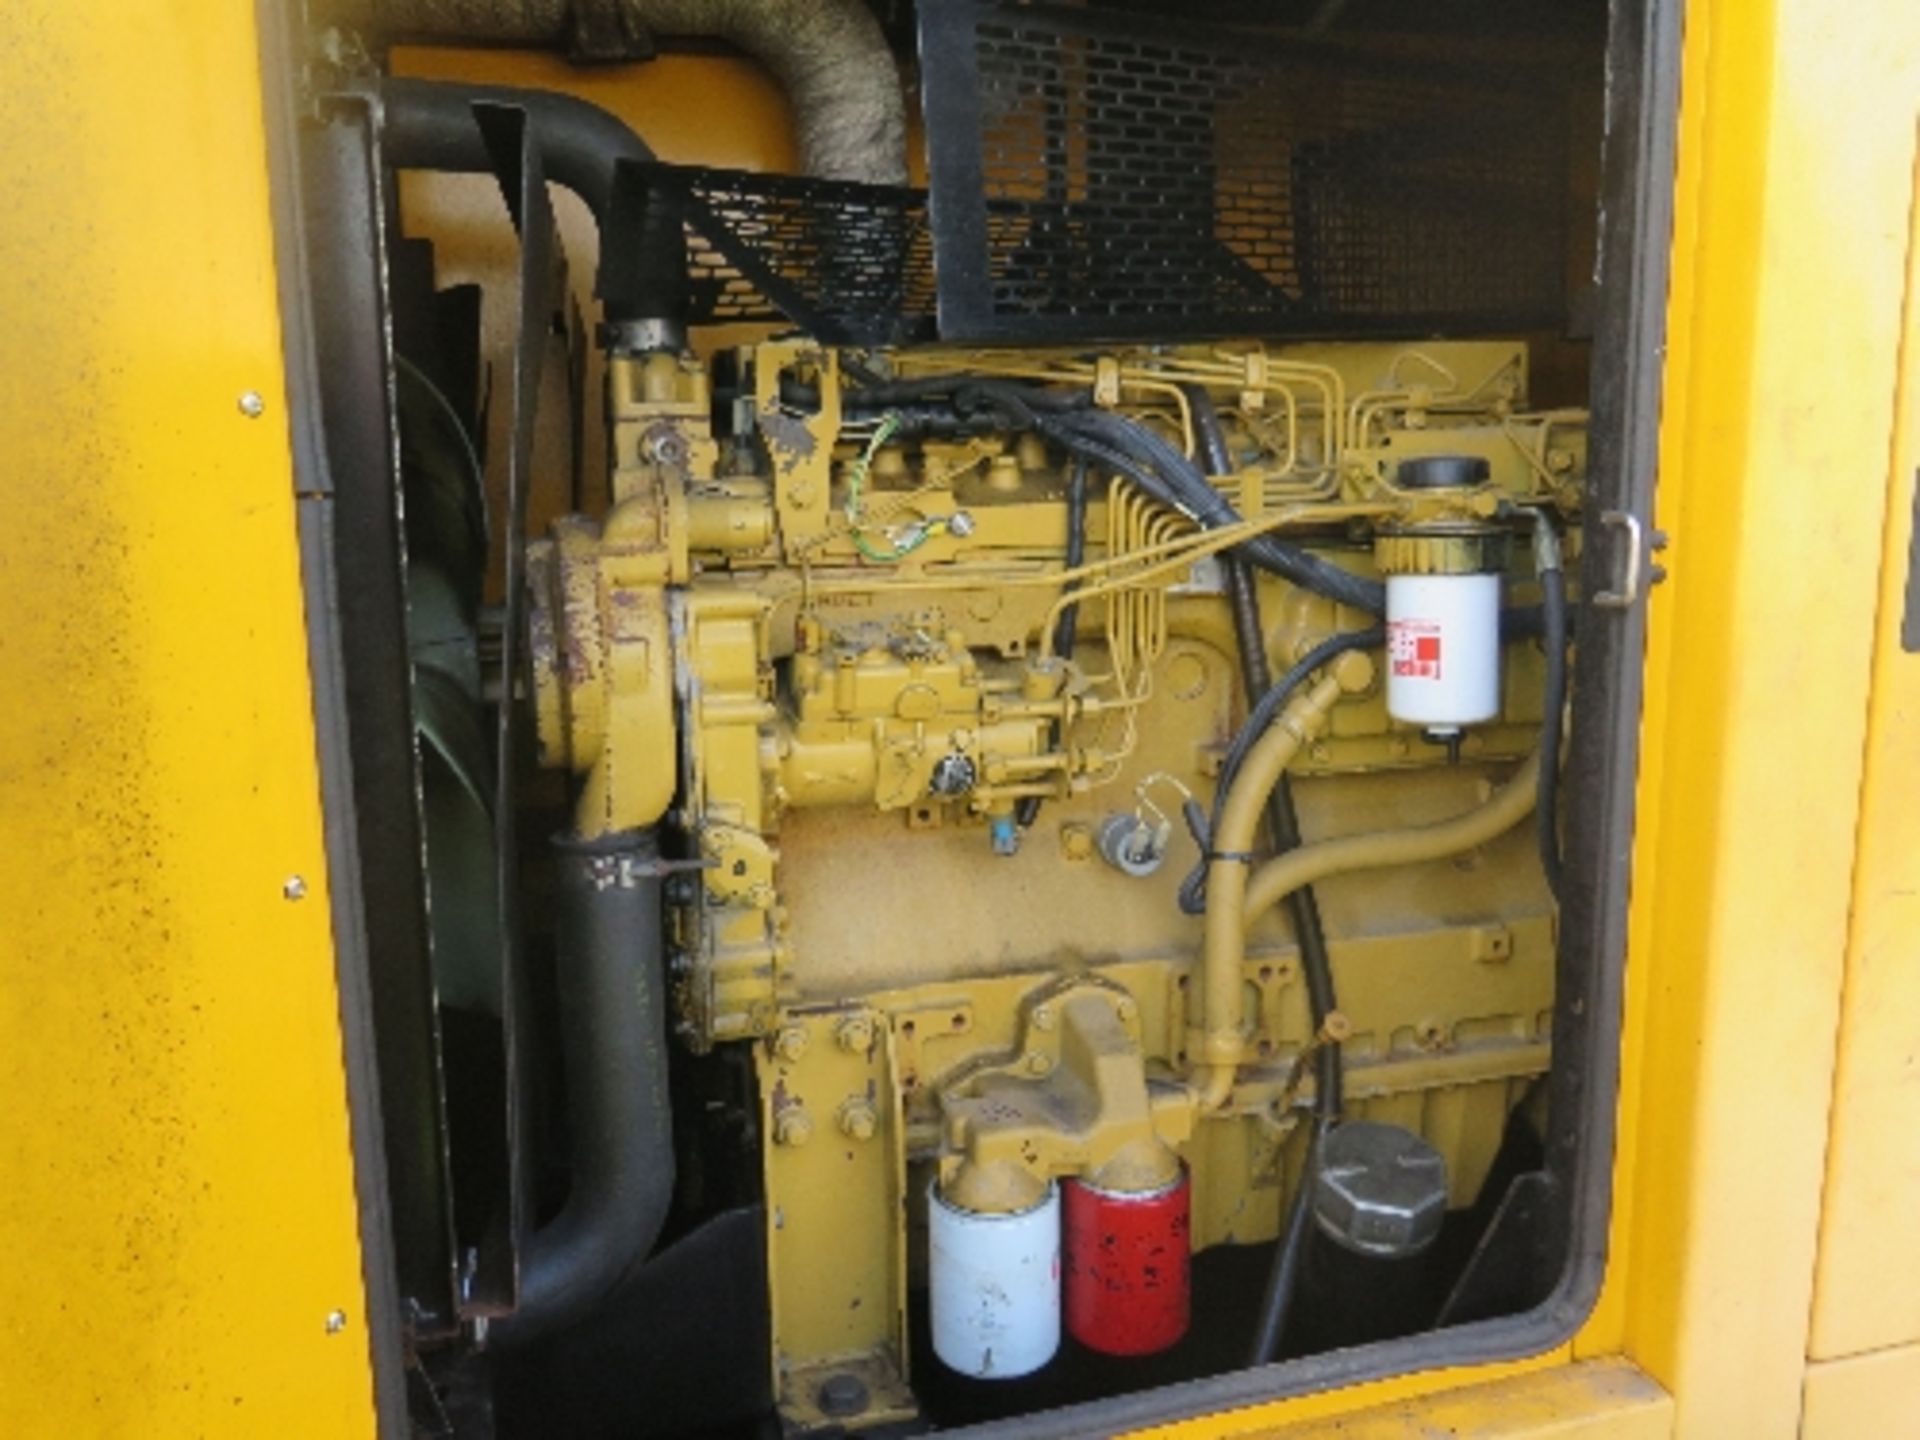 Caterpillar XQE100 trailer mounted generator 15455 hrs 145916
PERKINS - RUNS AND MAKES POWER
FAN - Image 3 of 8